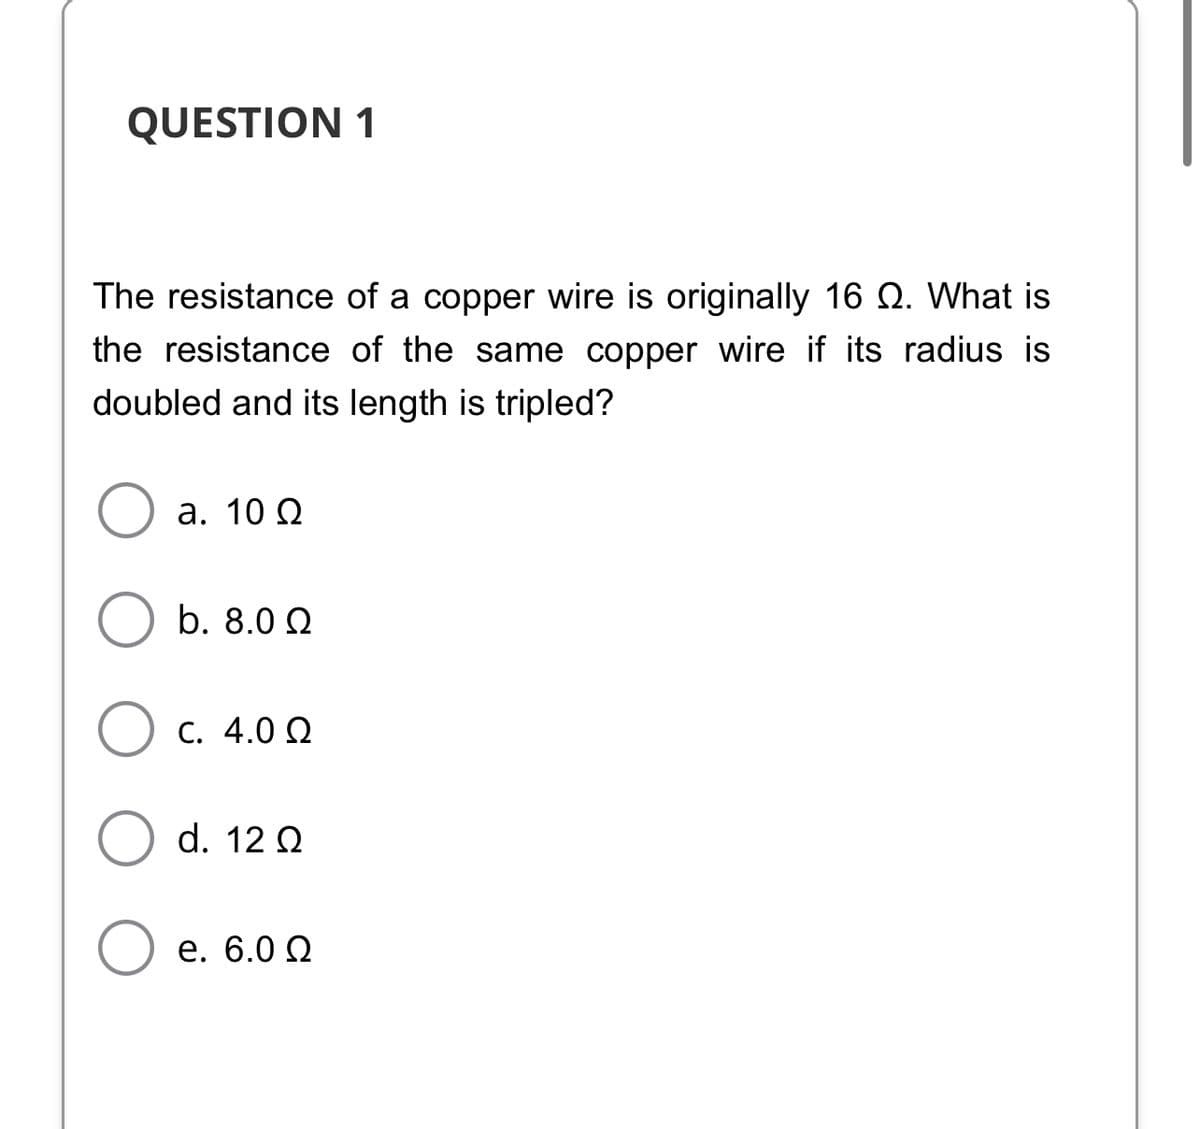 QUESTION 1
The resistance of a copper wire is originally 16 Q. What is
the resistance of the same copper wire if its radius is
doubled and its length is tripled?
а. 10 0
b. 8.0 Q
C. 4.0 Q
d. 12 Q
е. 6.0 0
